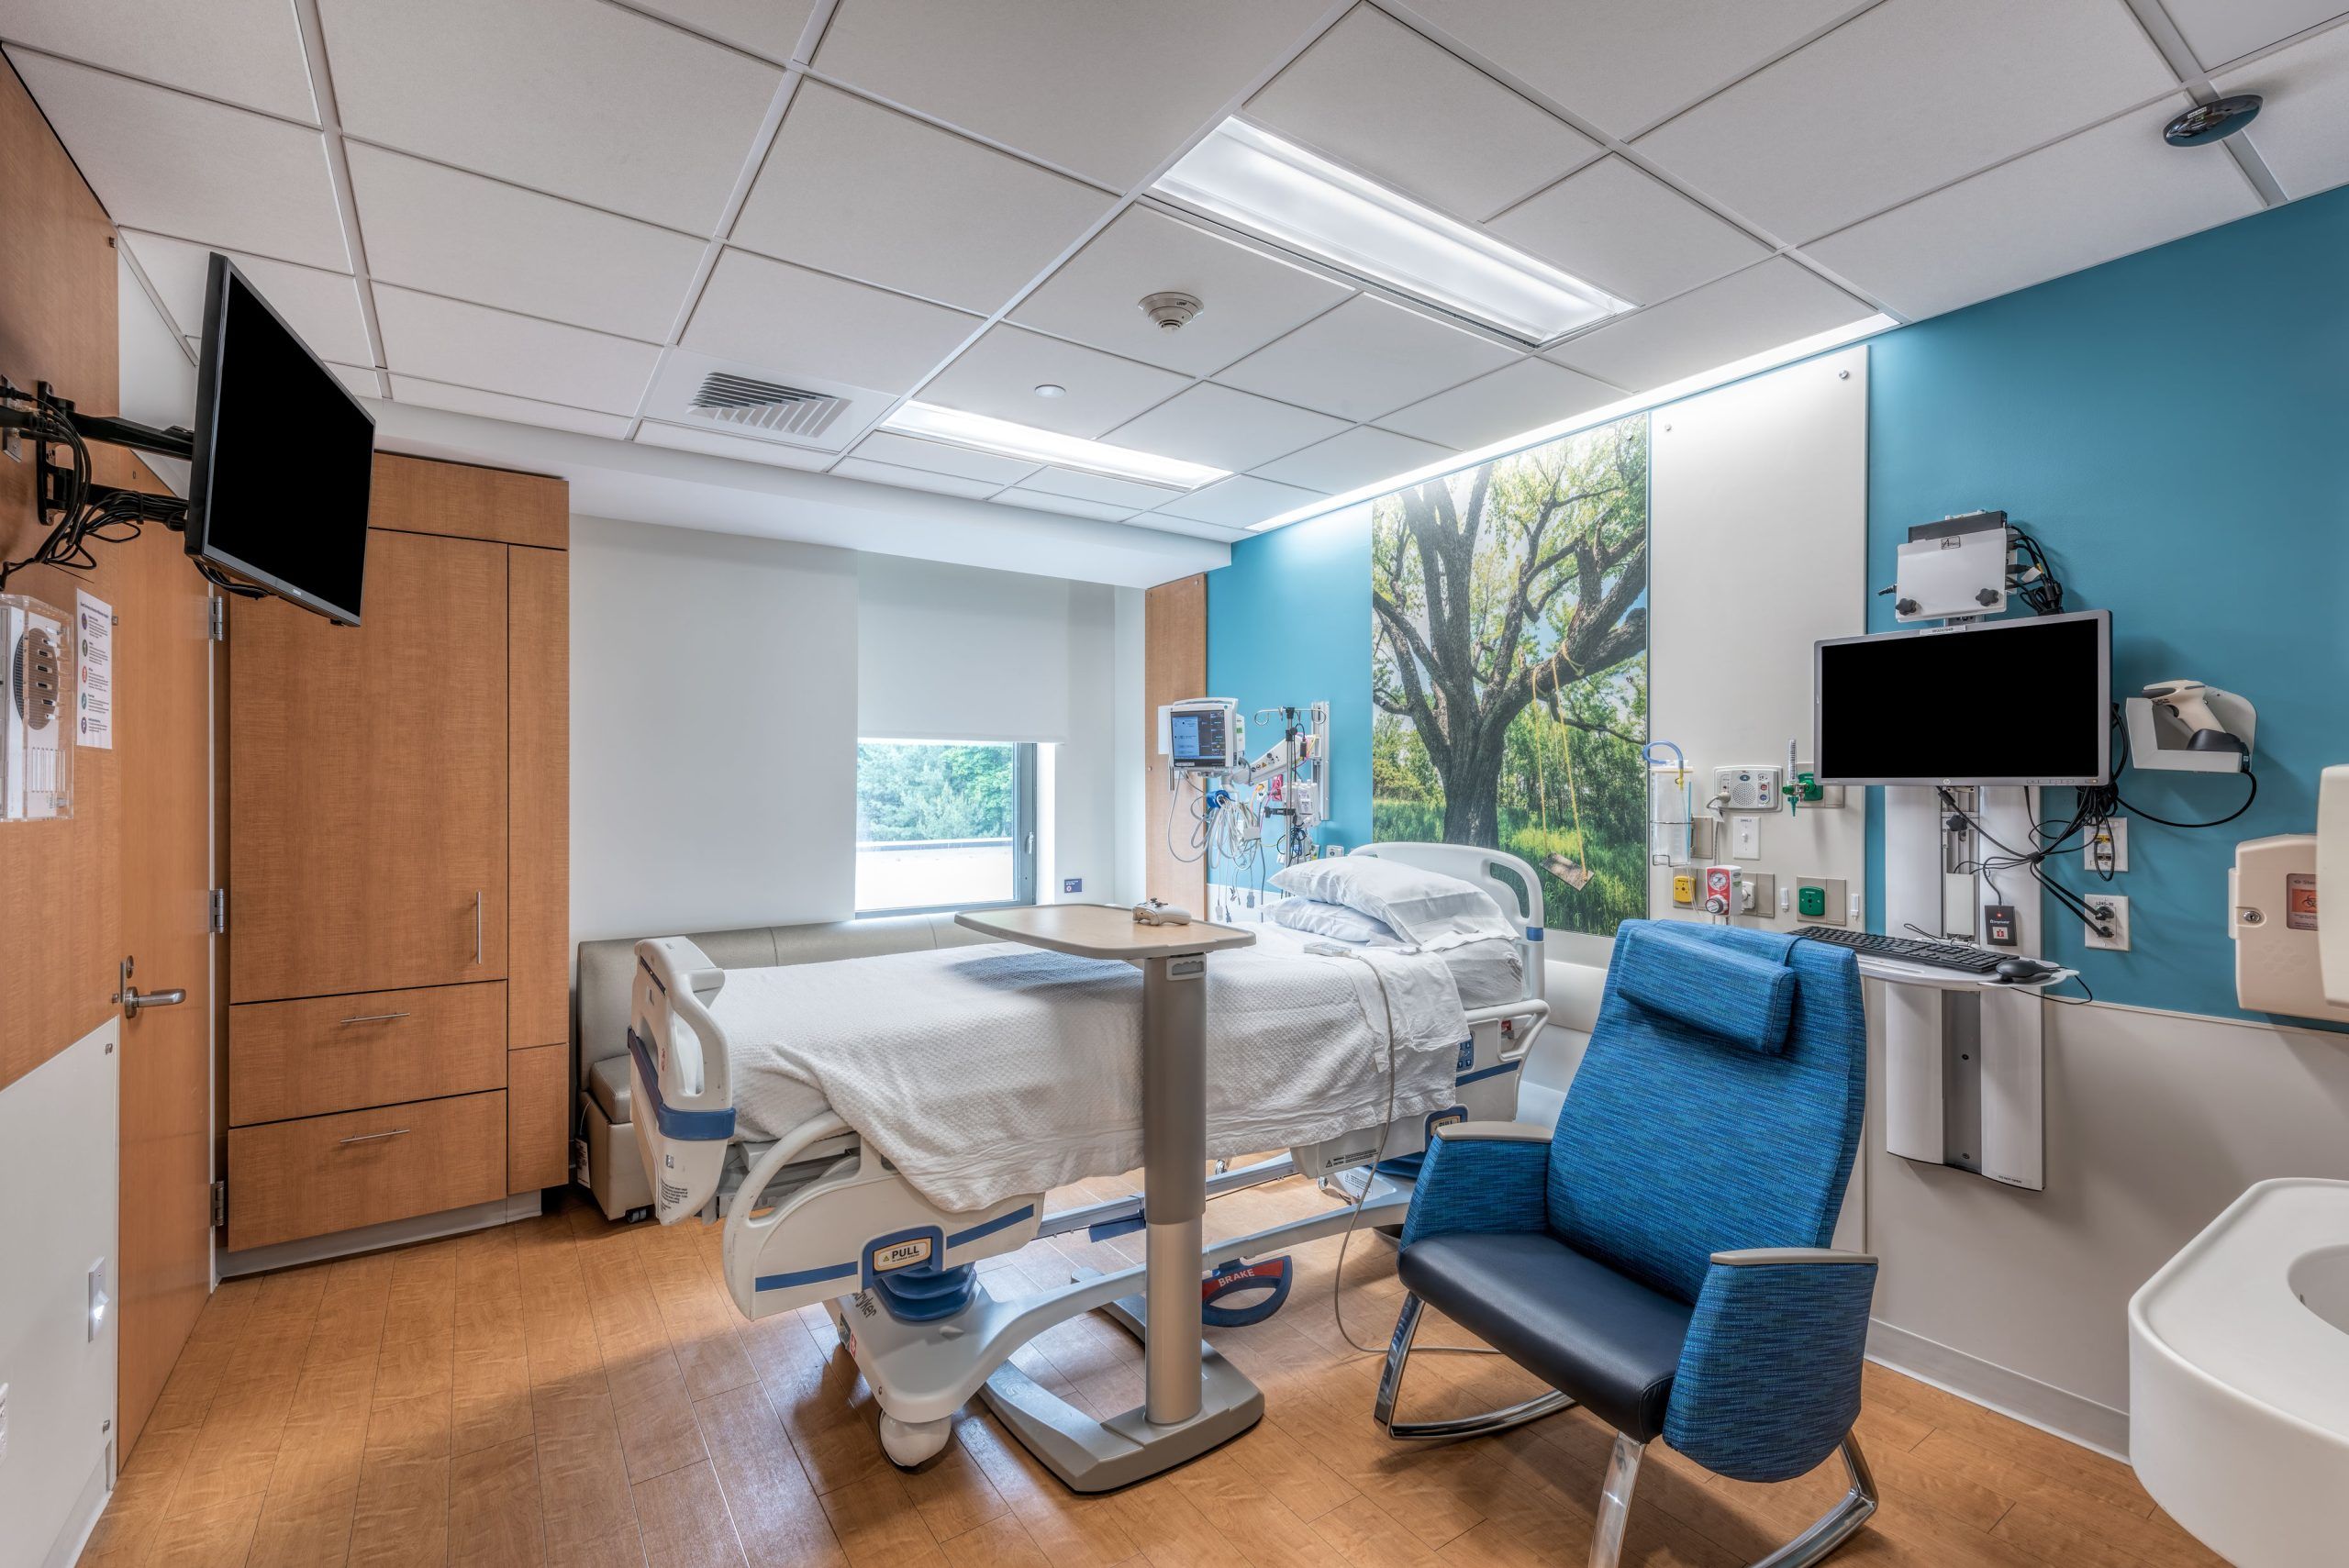 WISE TAKES A LEAN APPROACH TO DELIVER NEWTON-WELLESLEY HOSPITAL’S RENOVATED PEDIATRIC UNIT IN 12 WEEKS